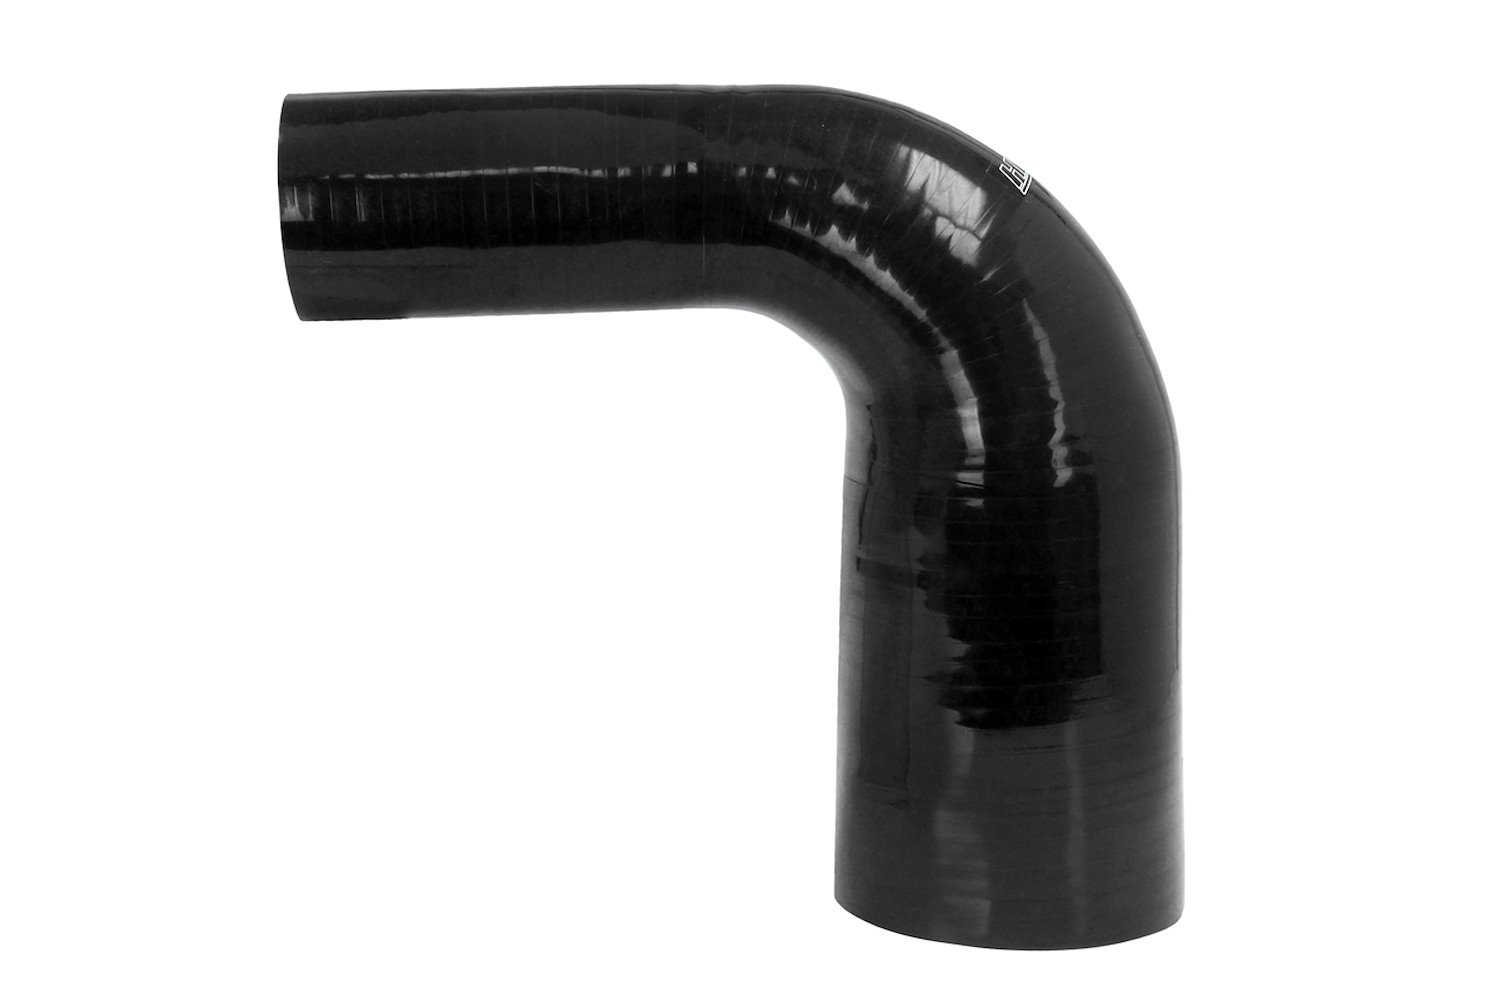 HTSER90-238-300-BLK Silicone 90-Degree Elbow Hose, High-Temp 4-Ply Reinforced, 2-3/8 in. - 3 in. ID, Black